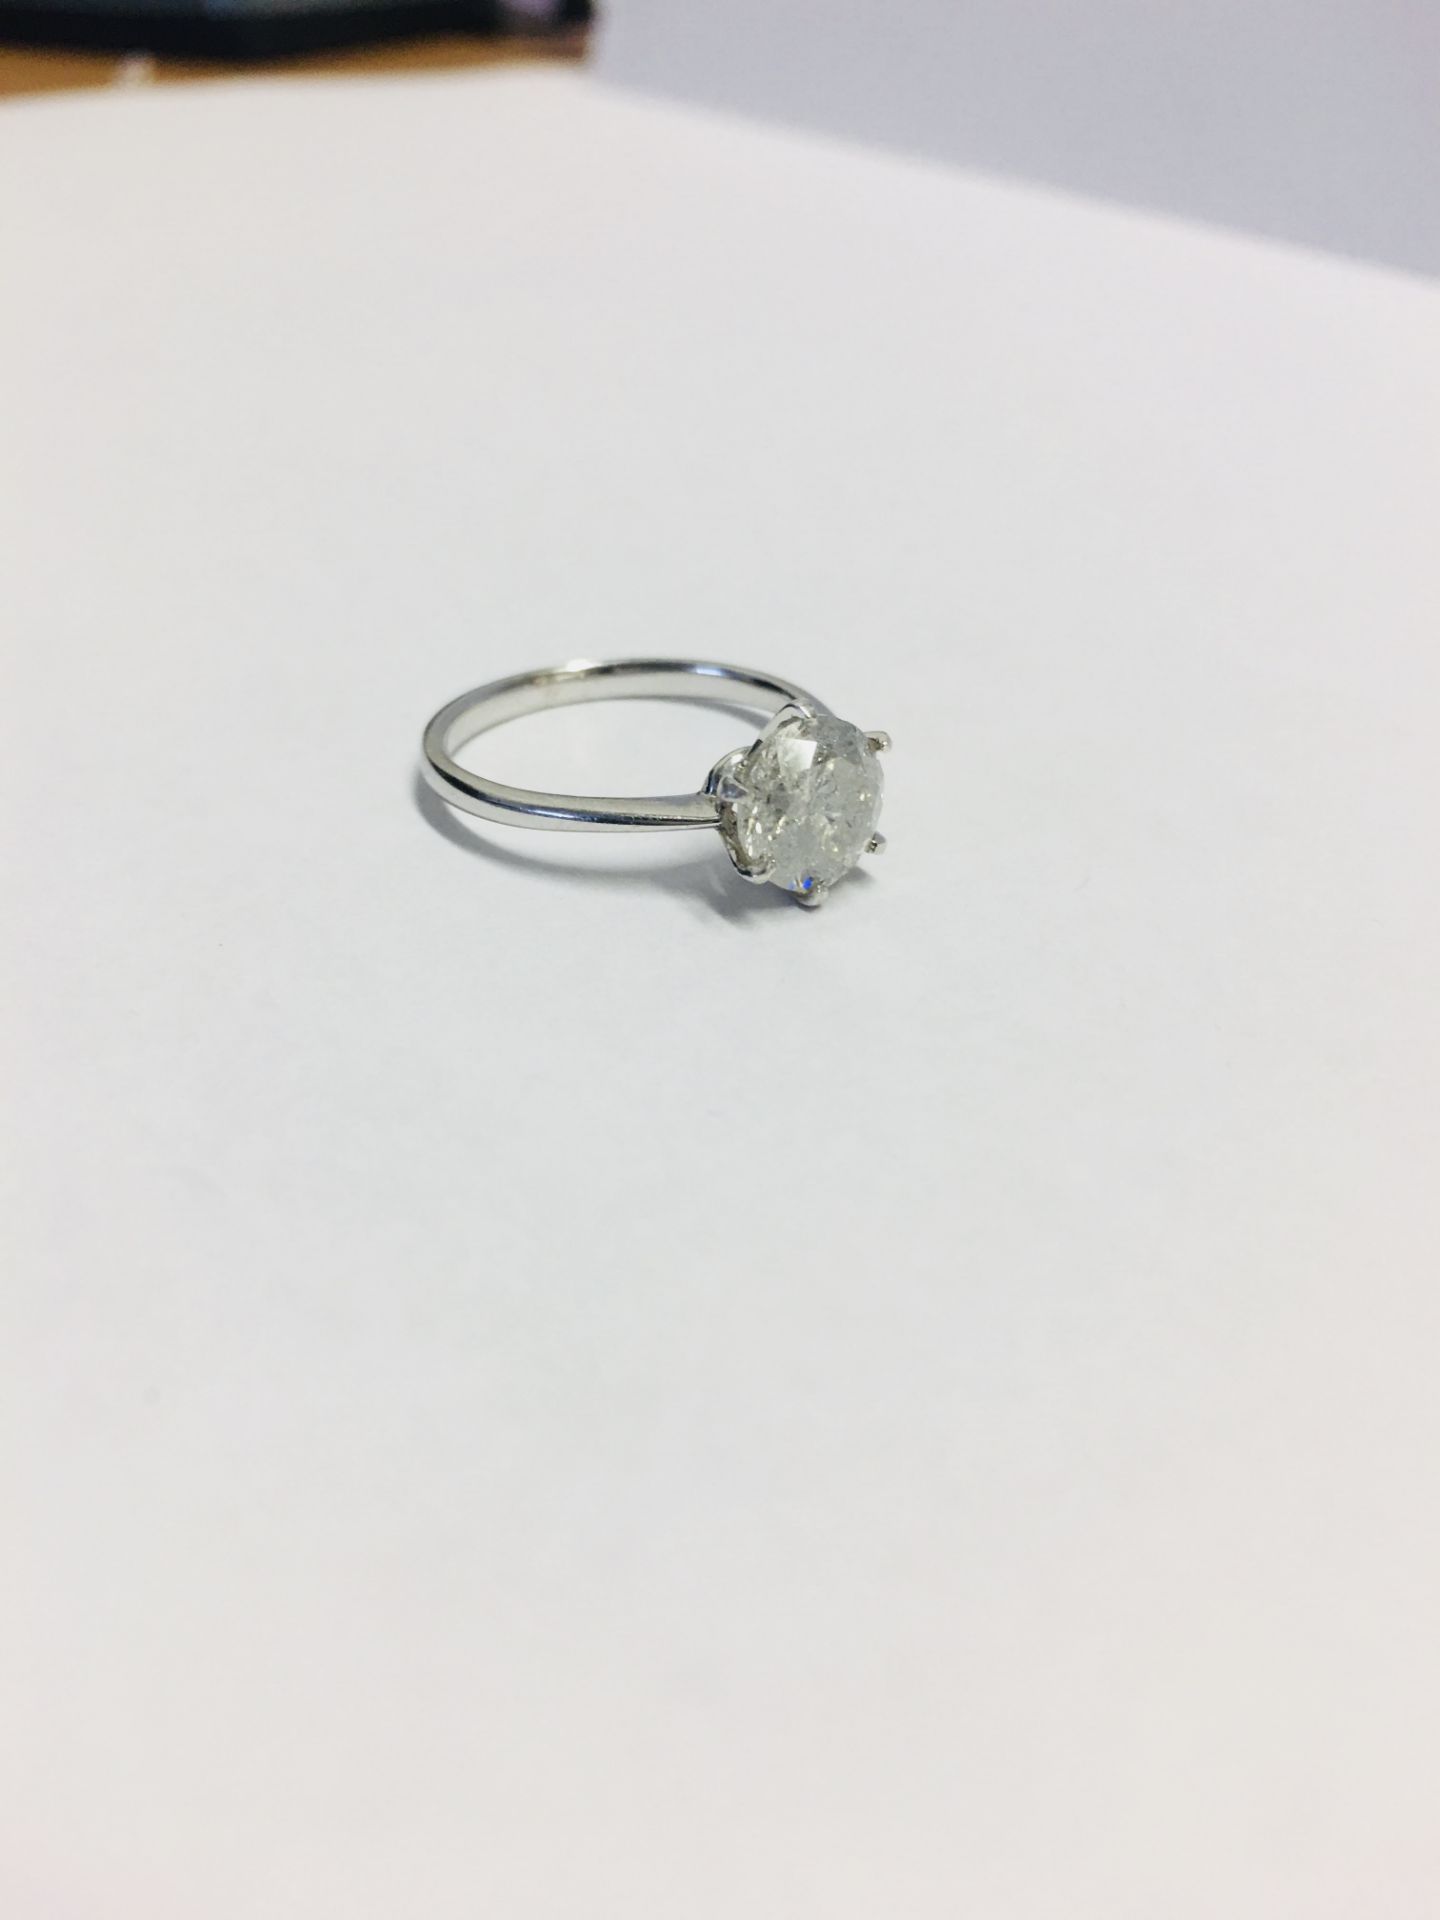 Diamond Solitaire Ring, - Image 5 of 6